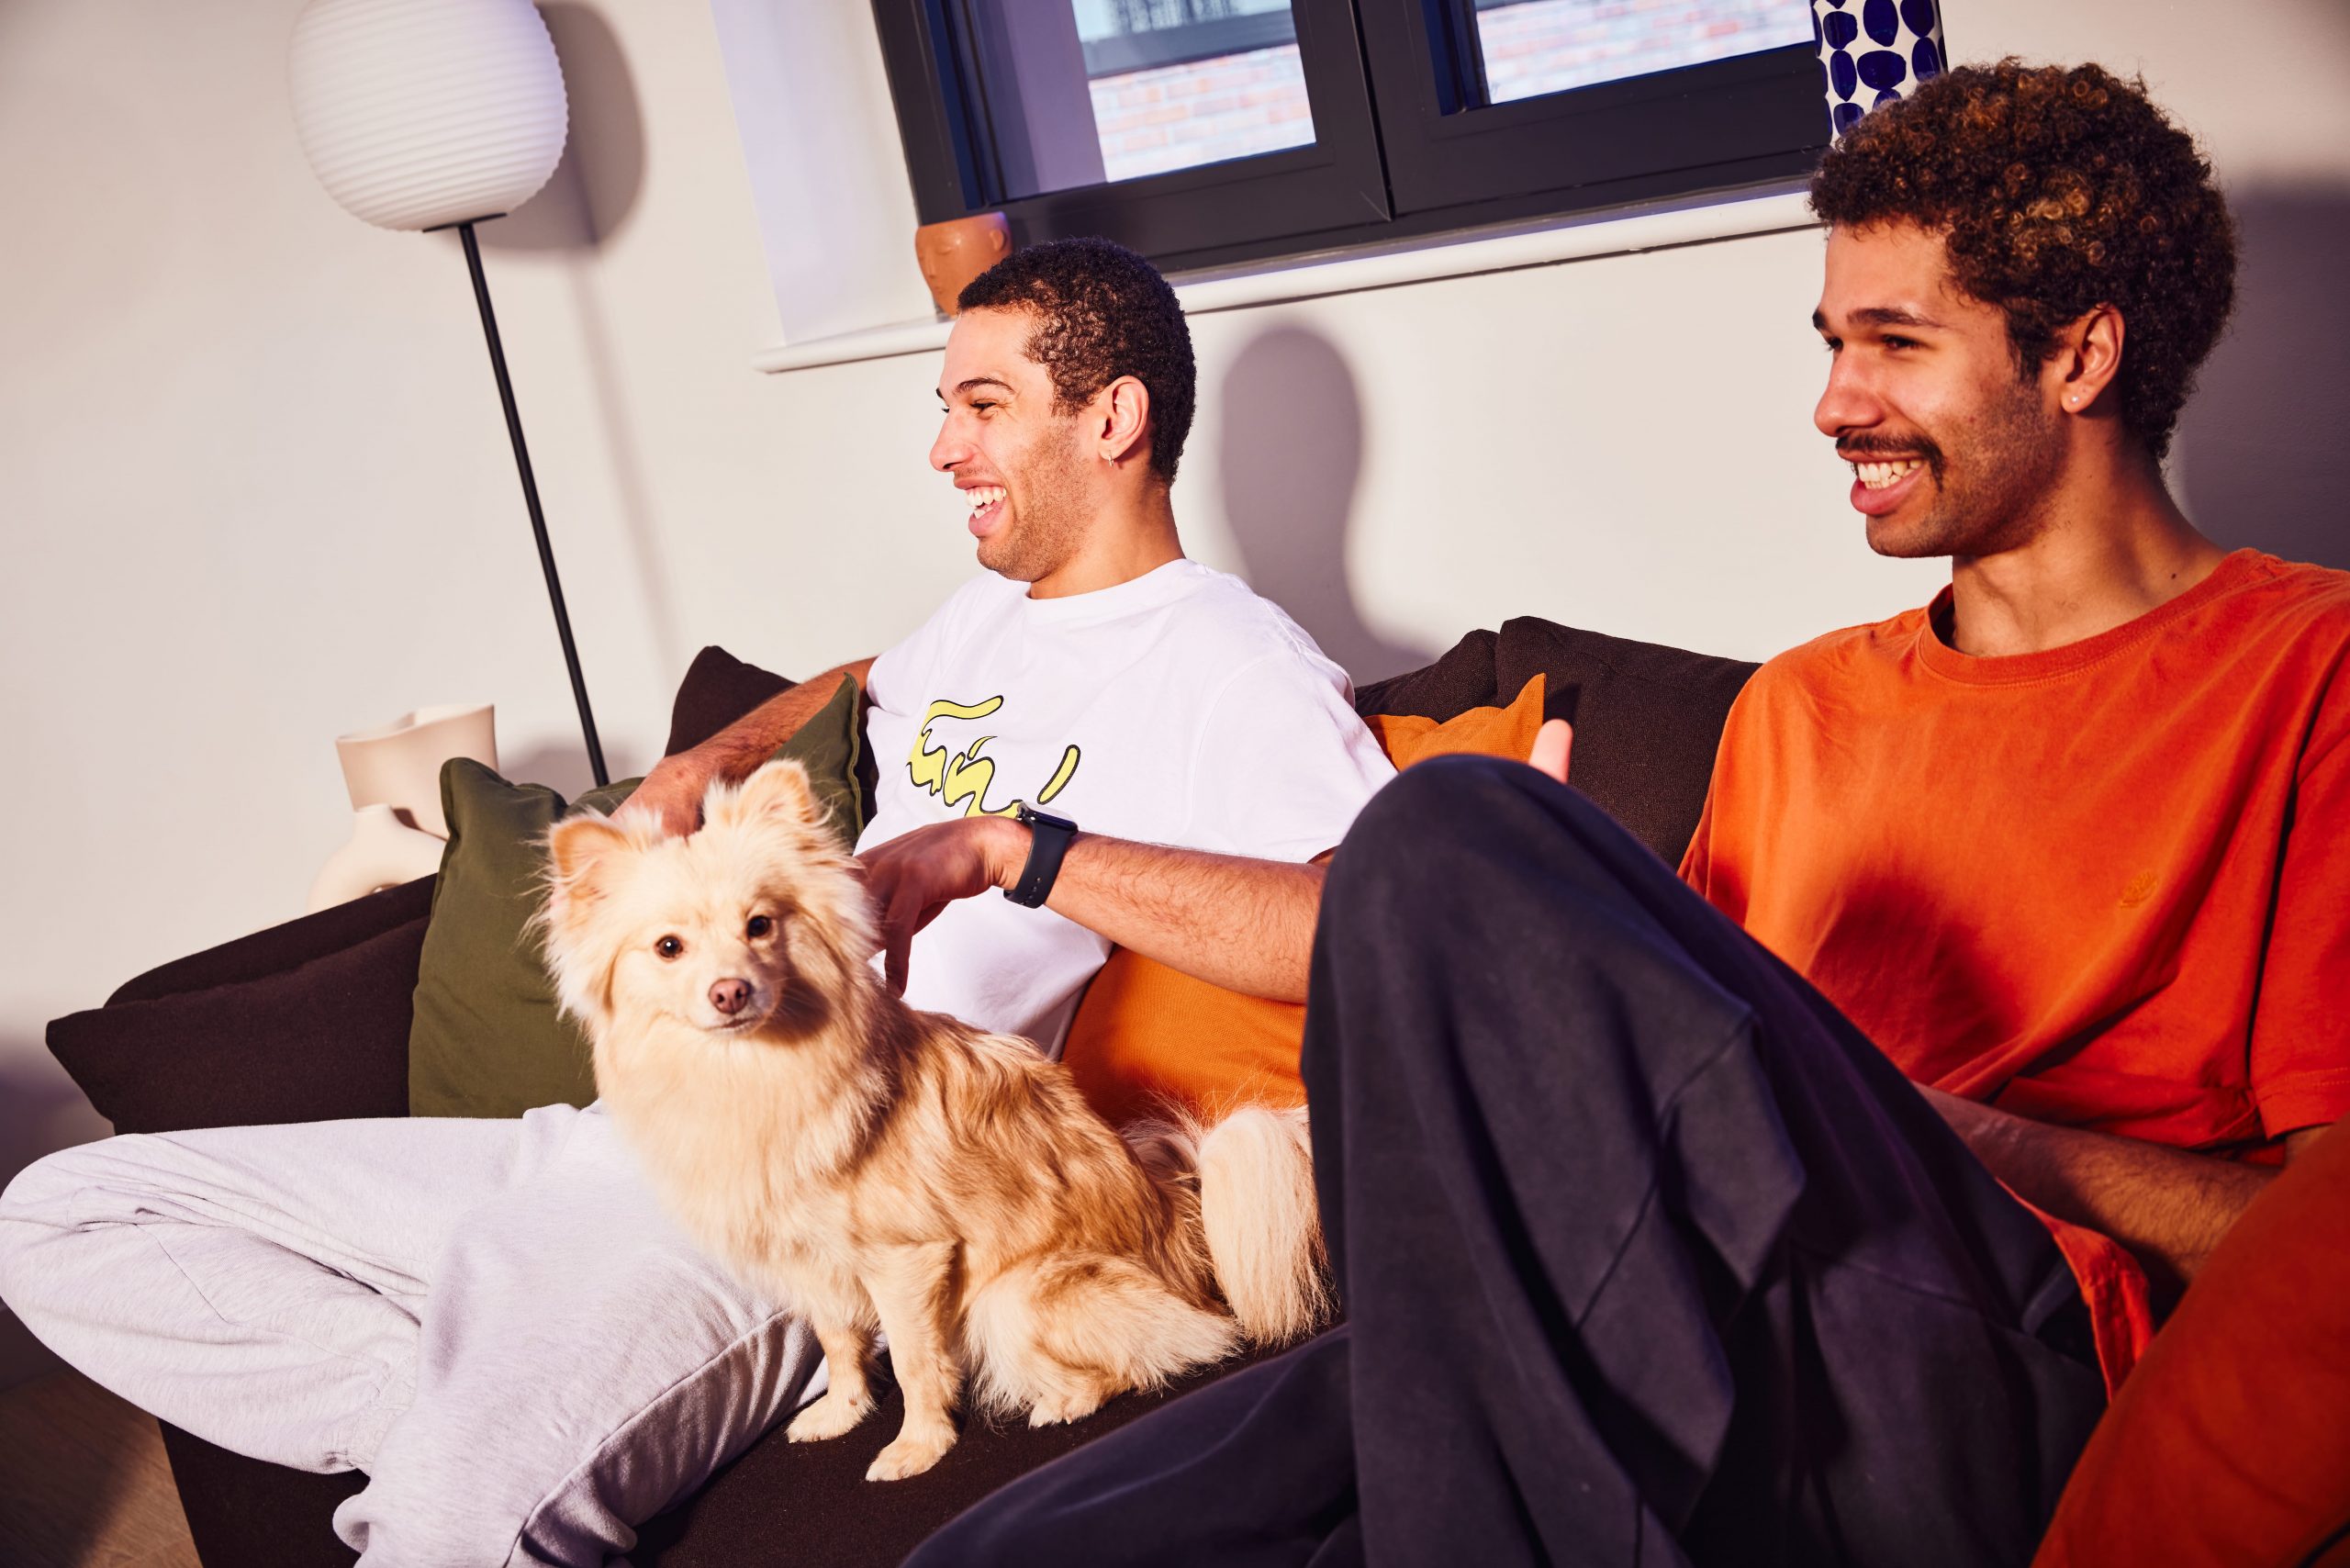 Two young people and a dog sit on a sofa, and laugh at a tv show.